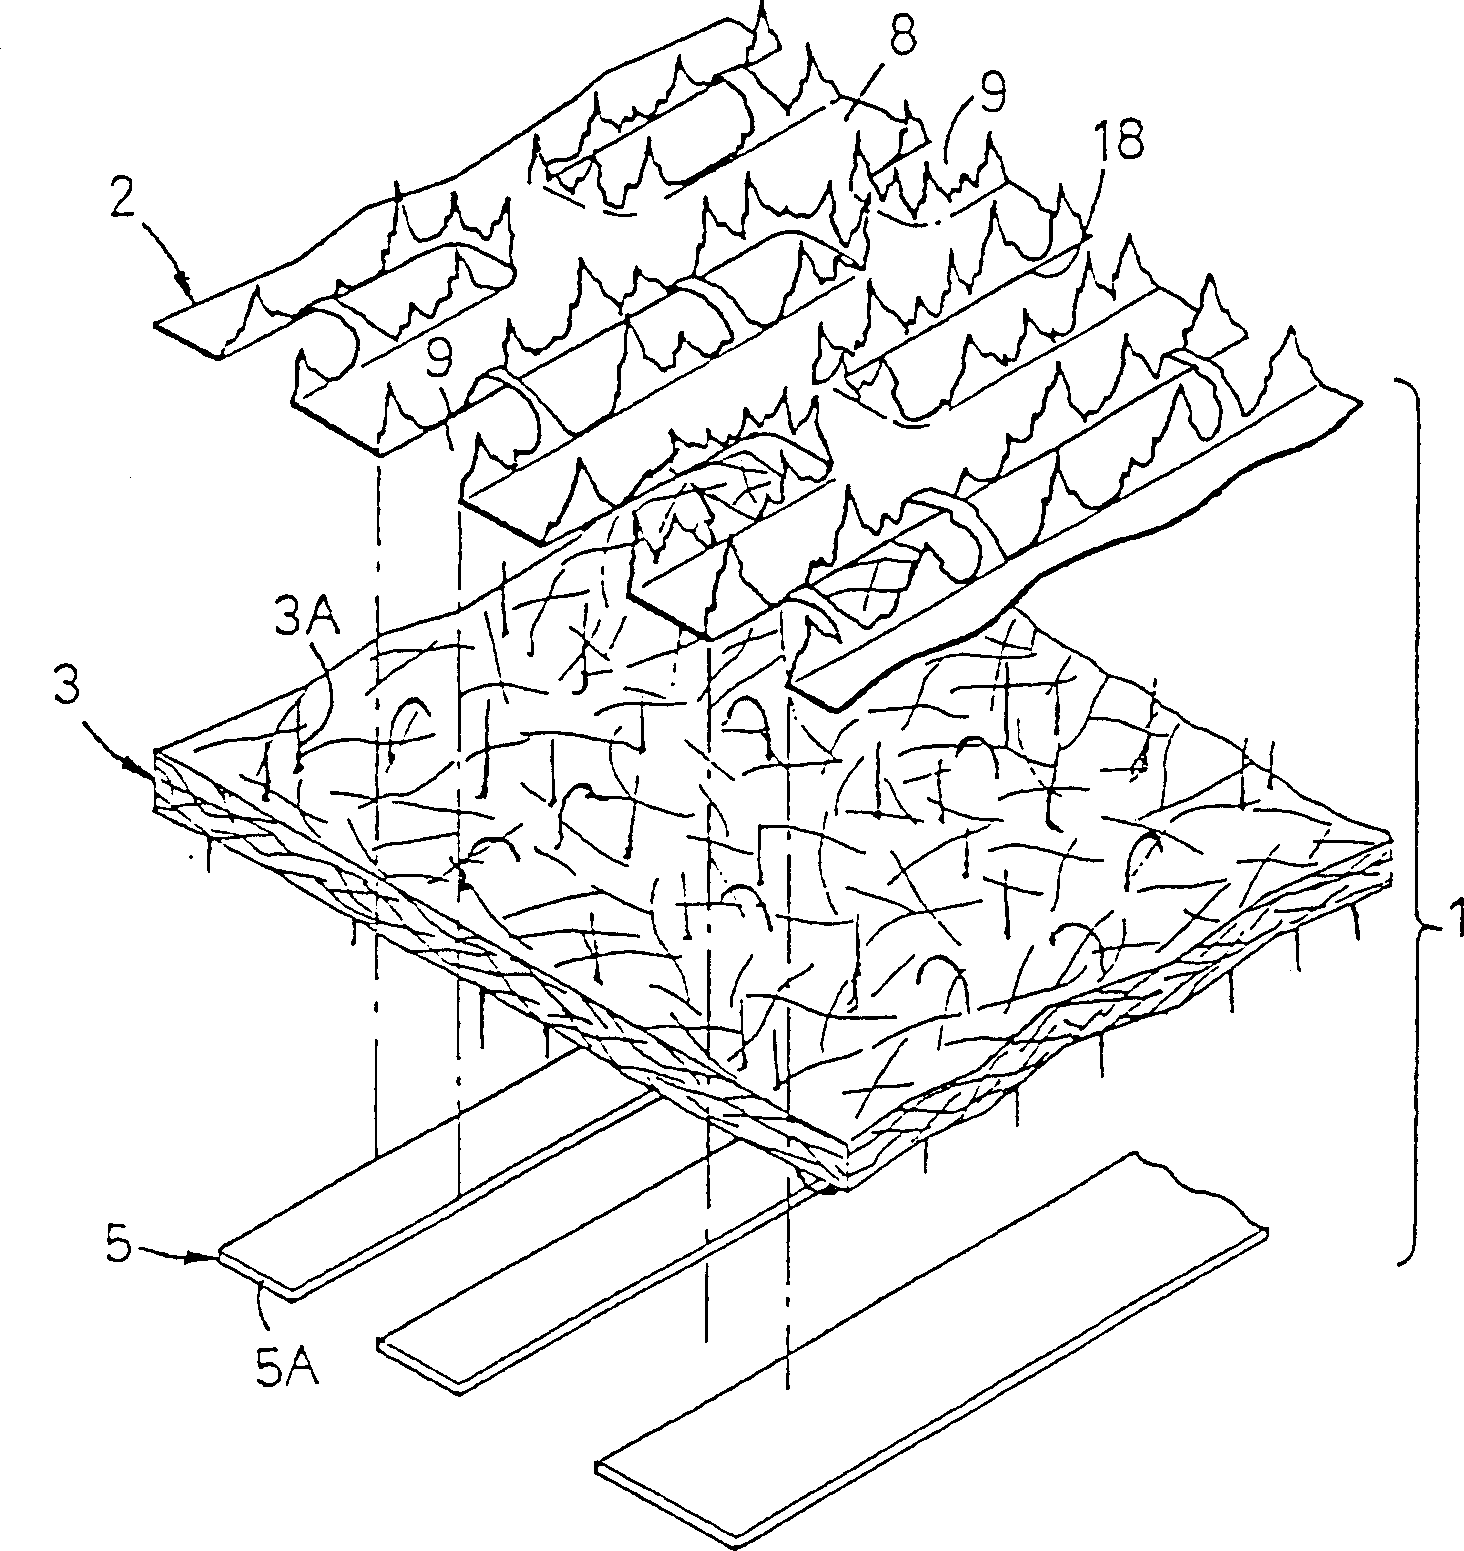 Fluid permeance surface layer of body fluid absorption article, and method of producing same